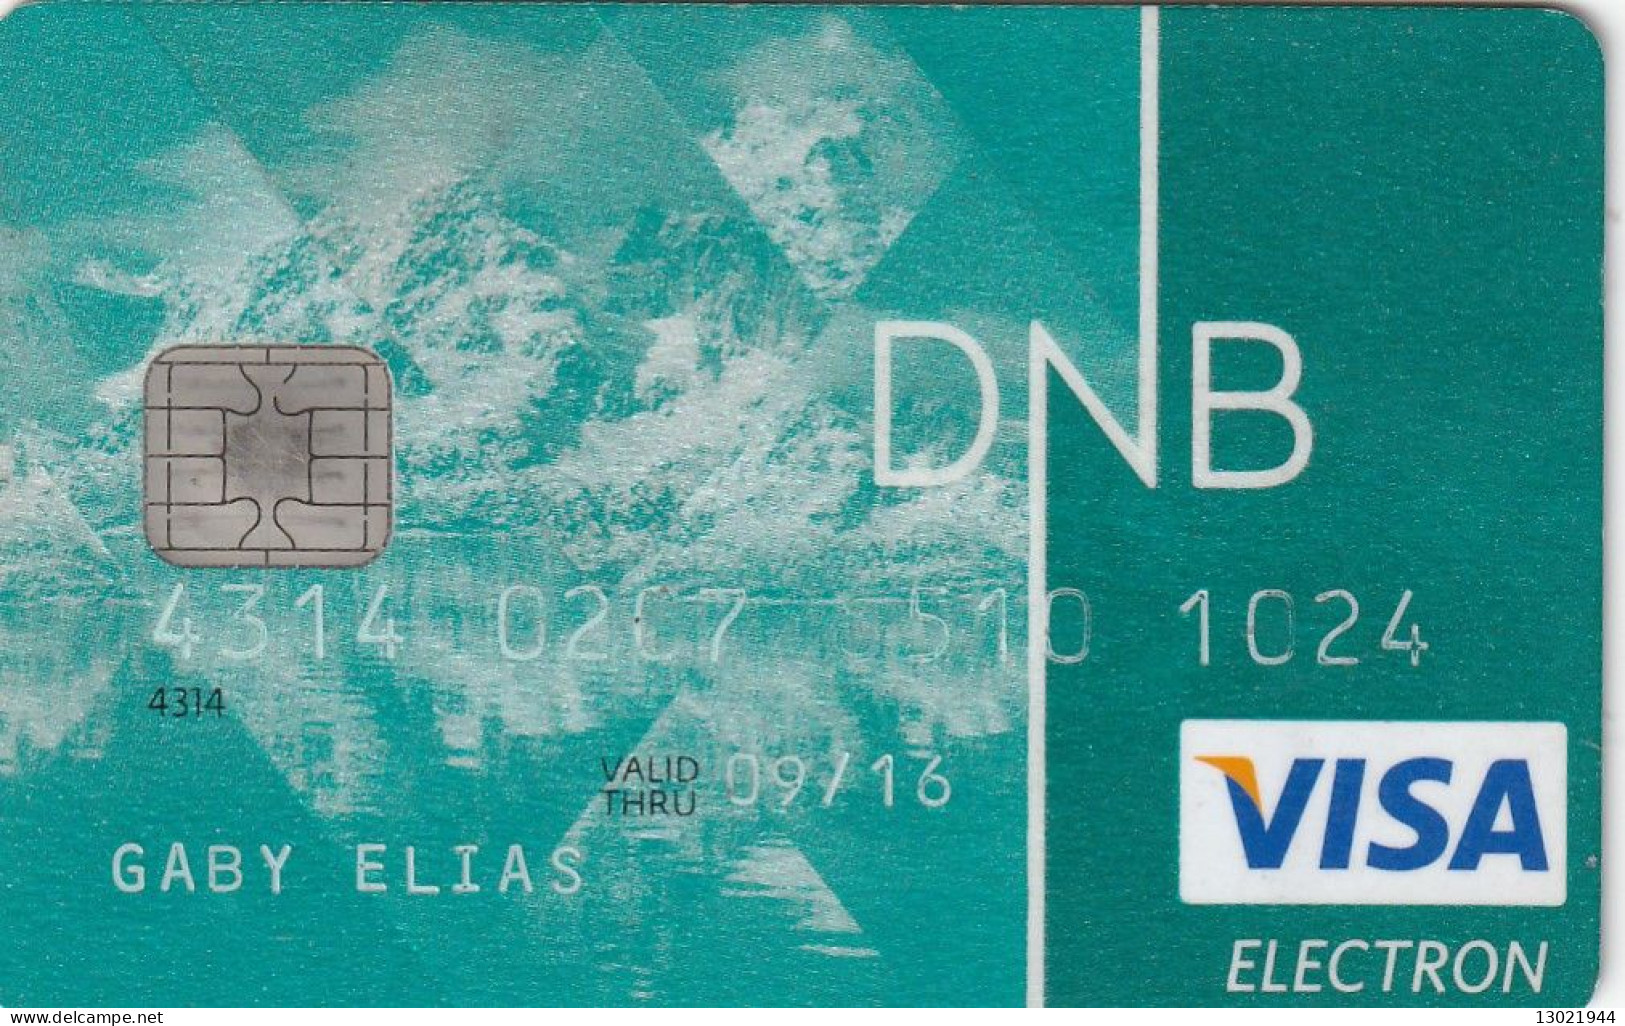 N. 3 LITUANIA BANK  CARDS - POSSIBLE SALE OF SINGLE CARDS - Credit Cards (Exp. Date Min. 10 Years)